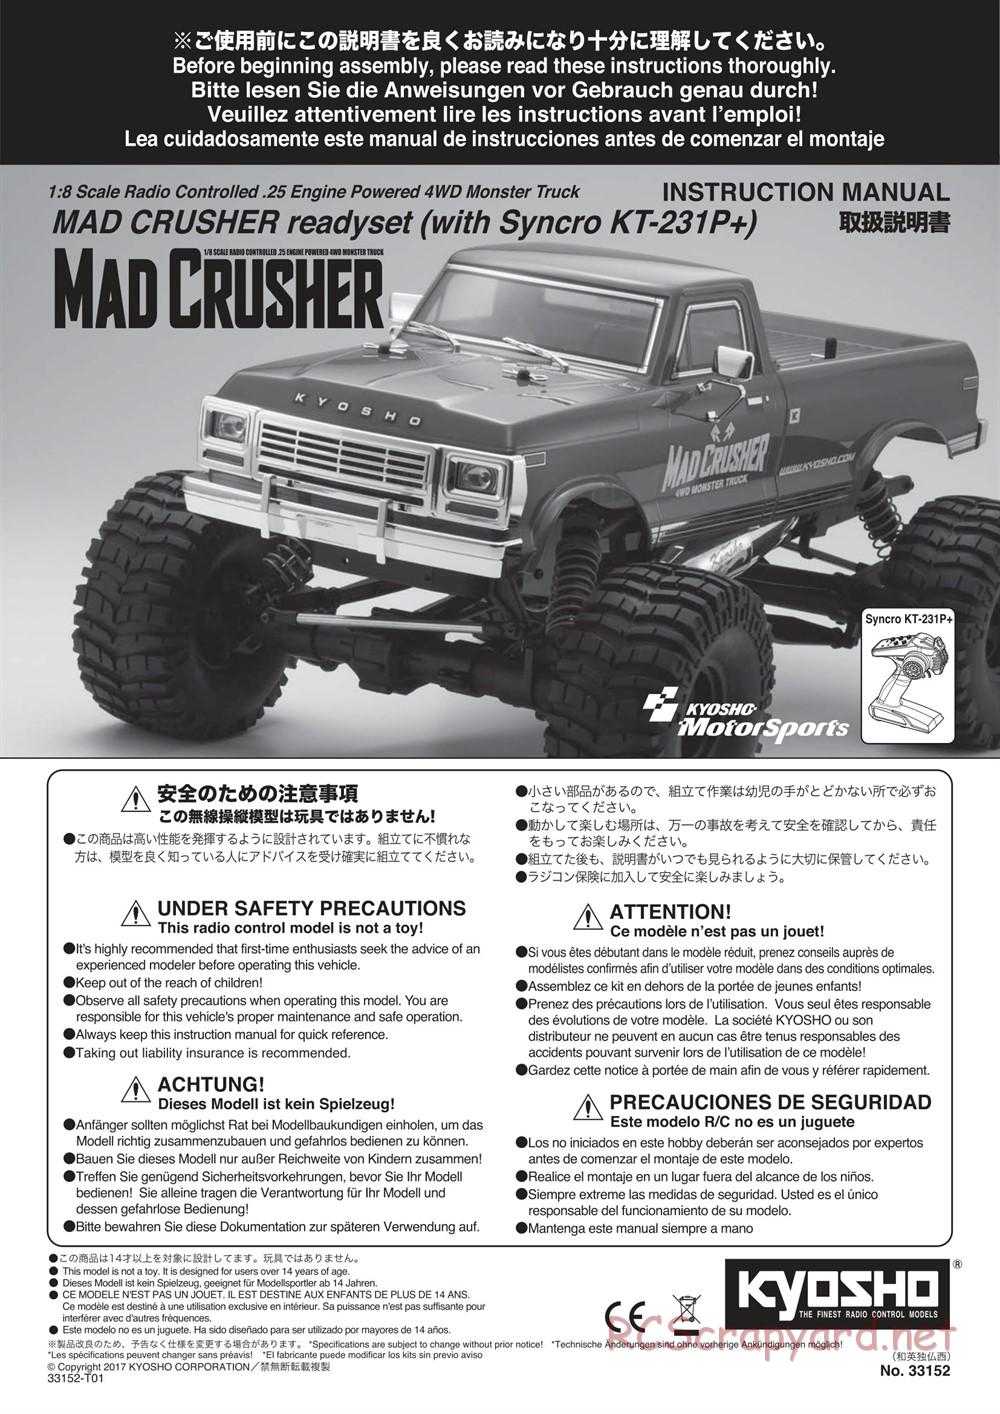 Kyosho - Mad Crusher - Manual - Page 1